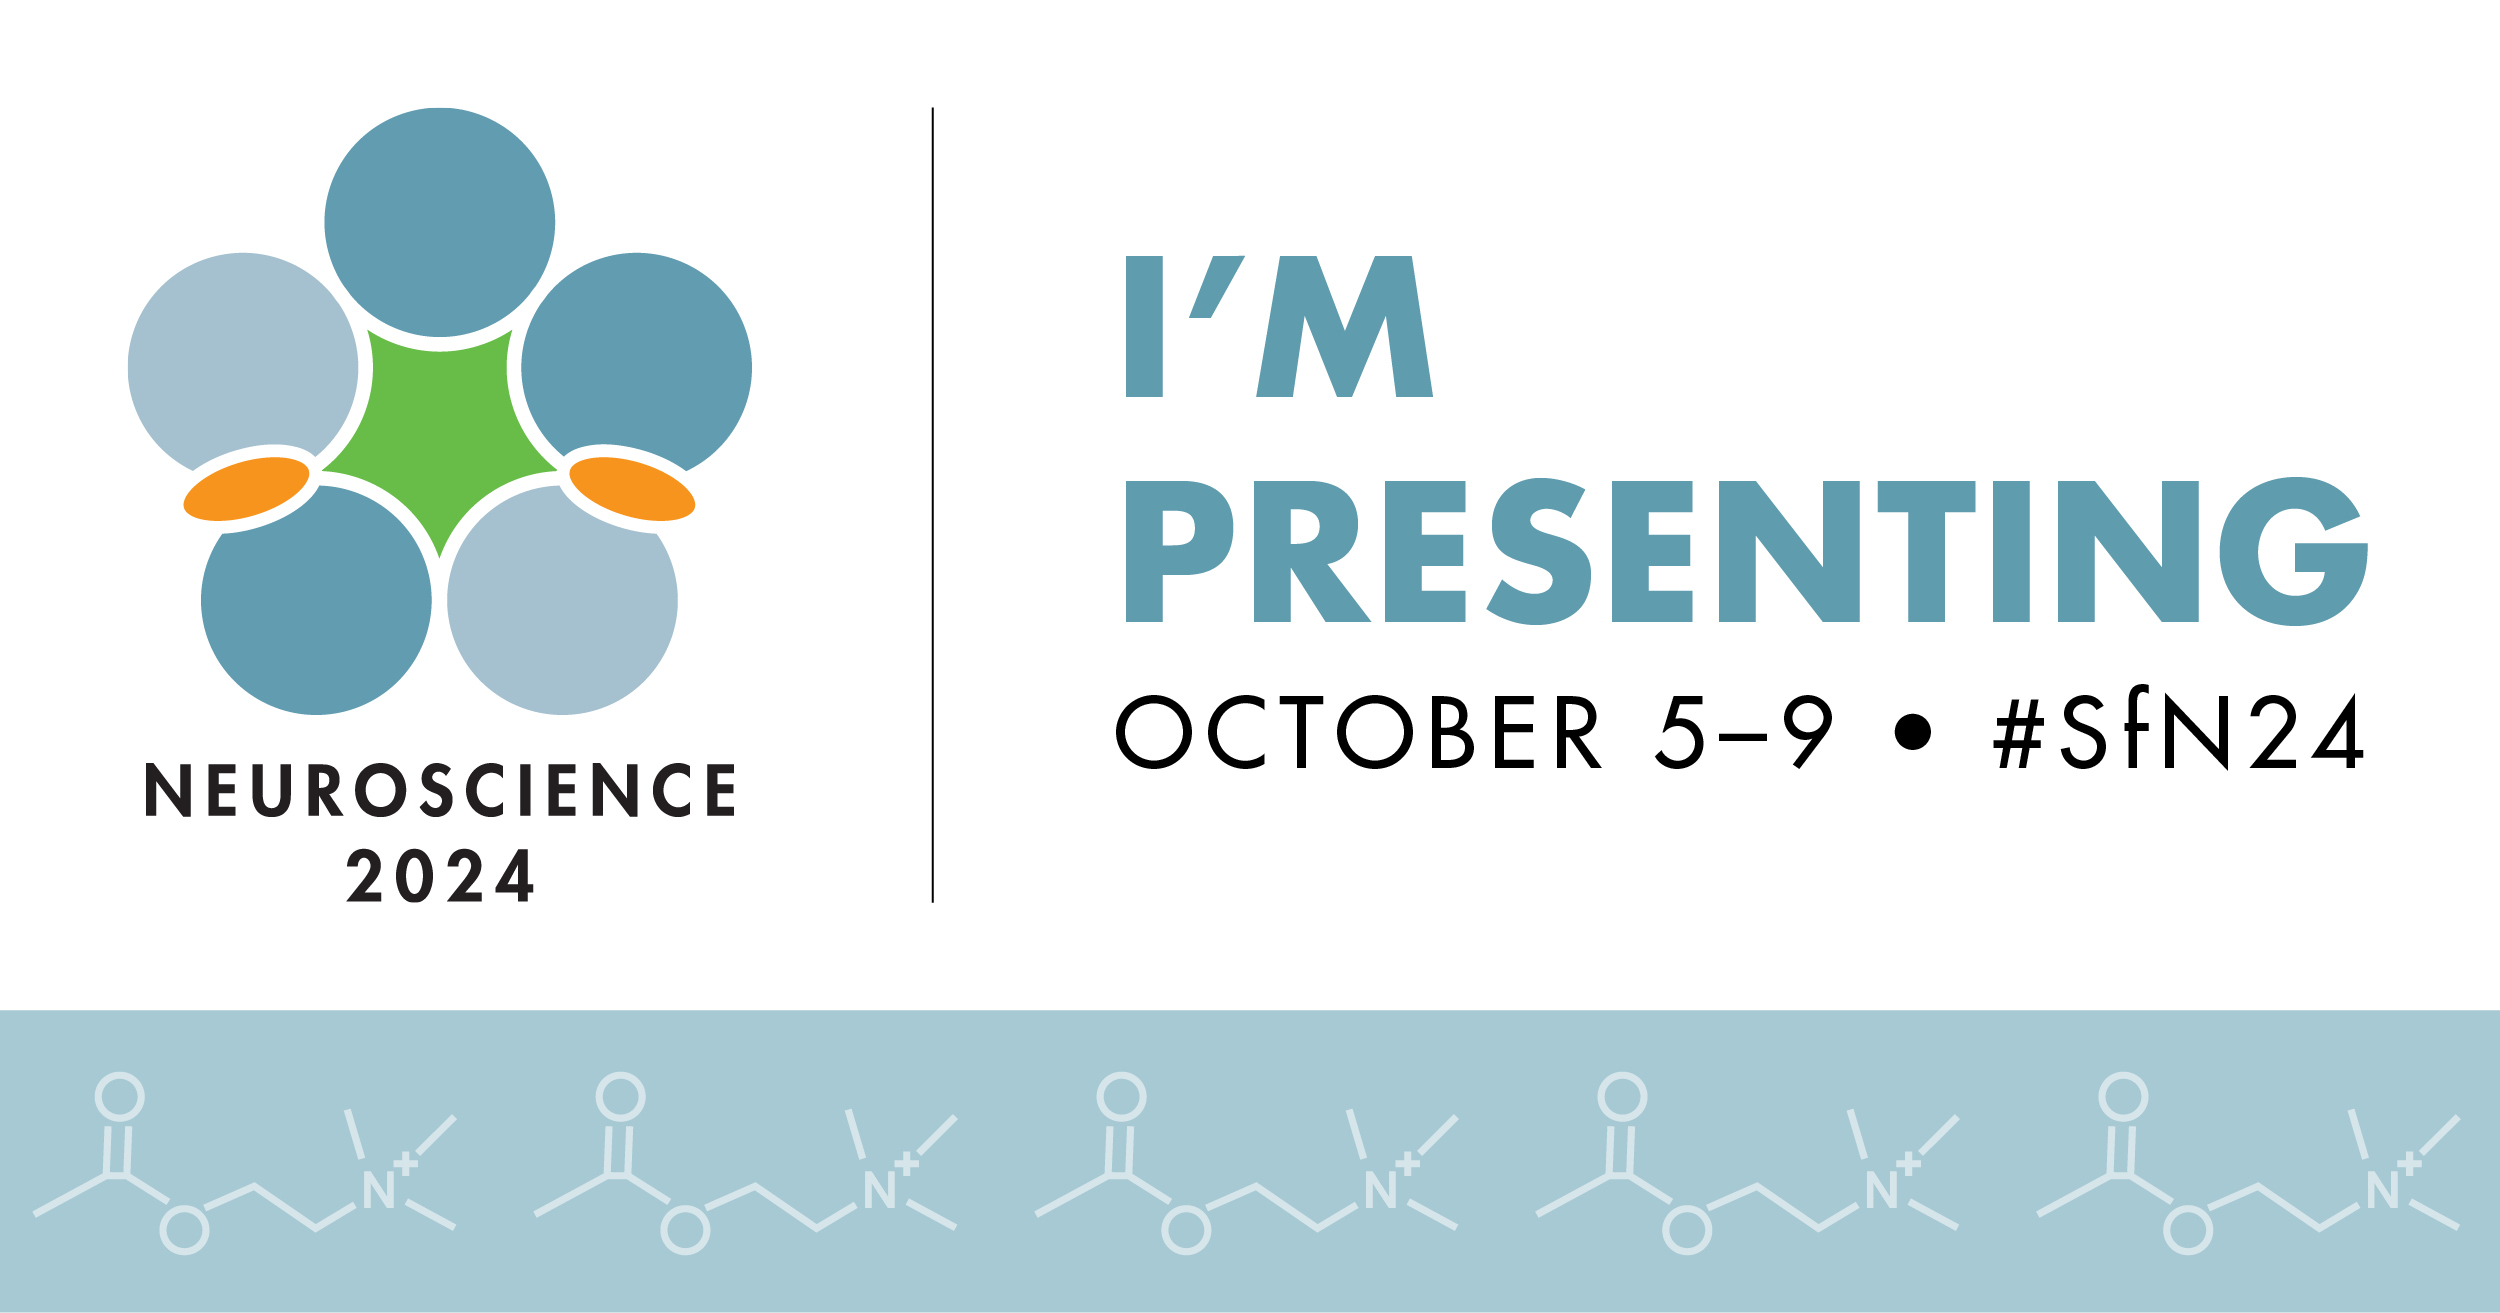 Image that says "I'm Presenting" with the Neuroscience 2024 logo to the left.